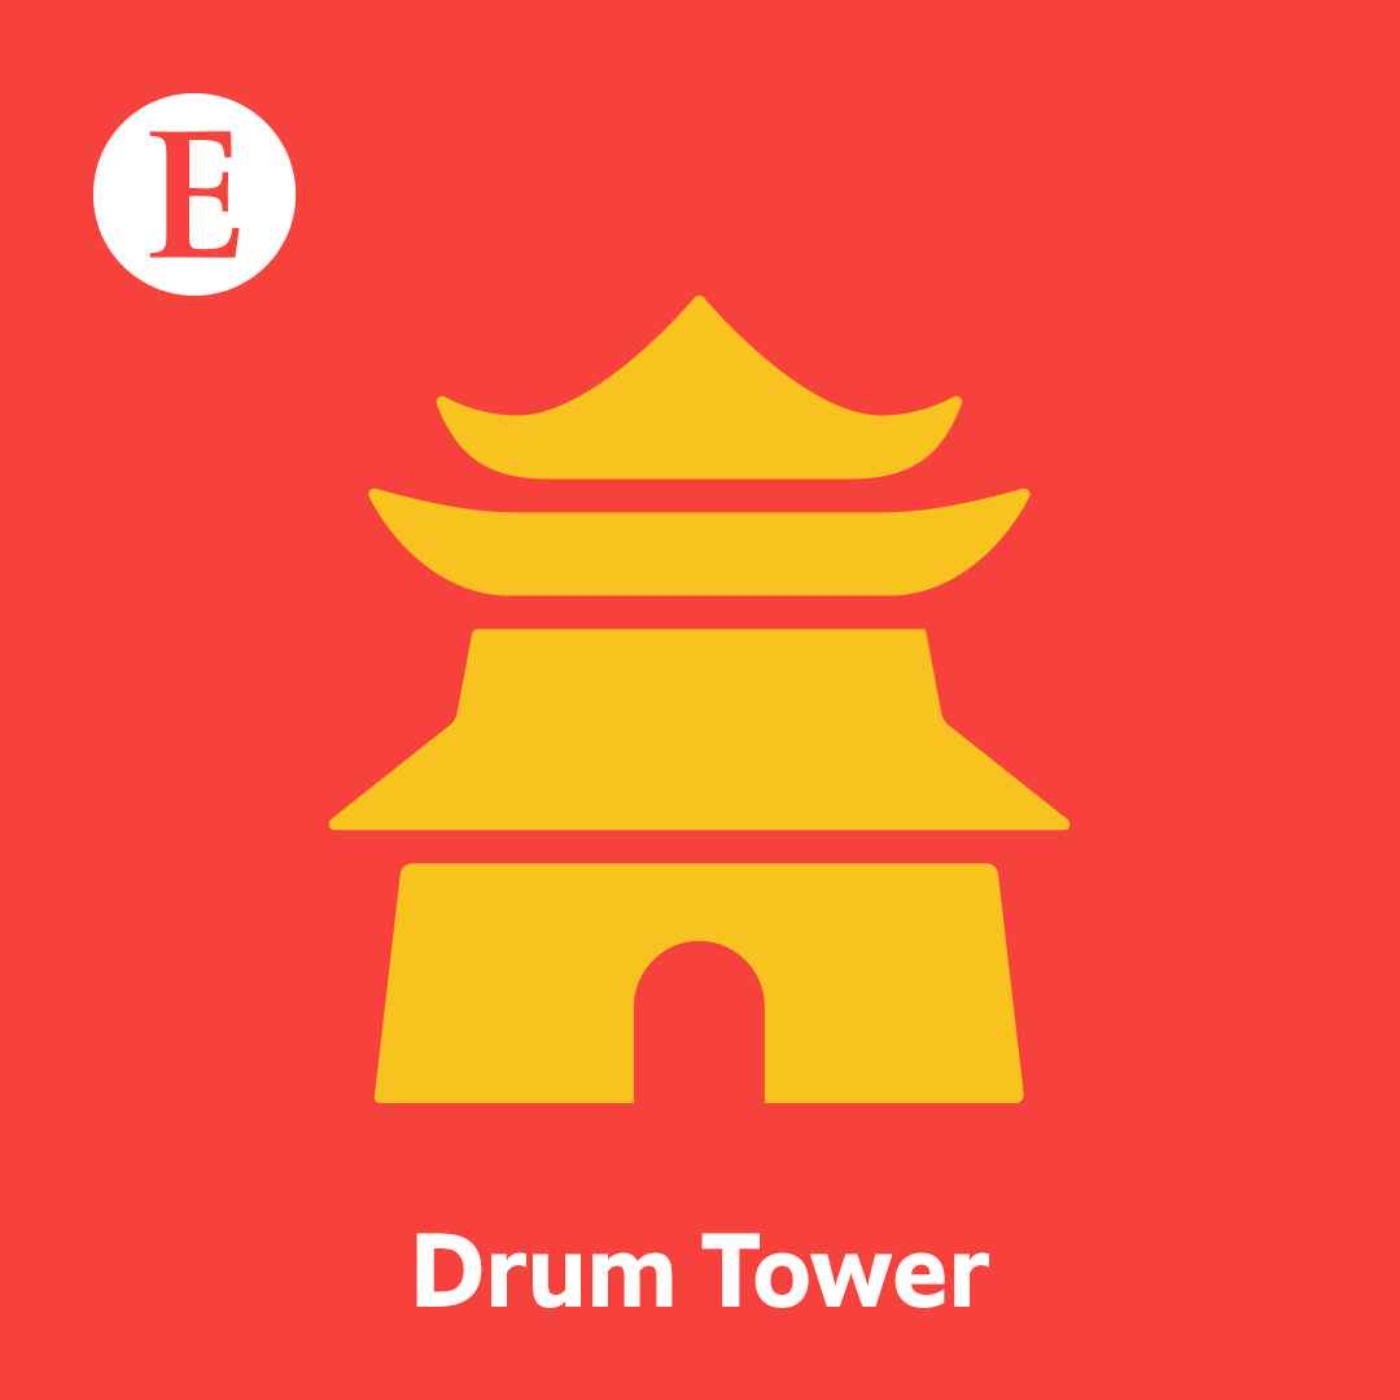 Drum Tower: The new wave